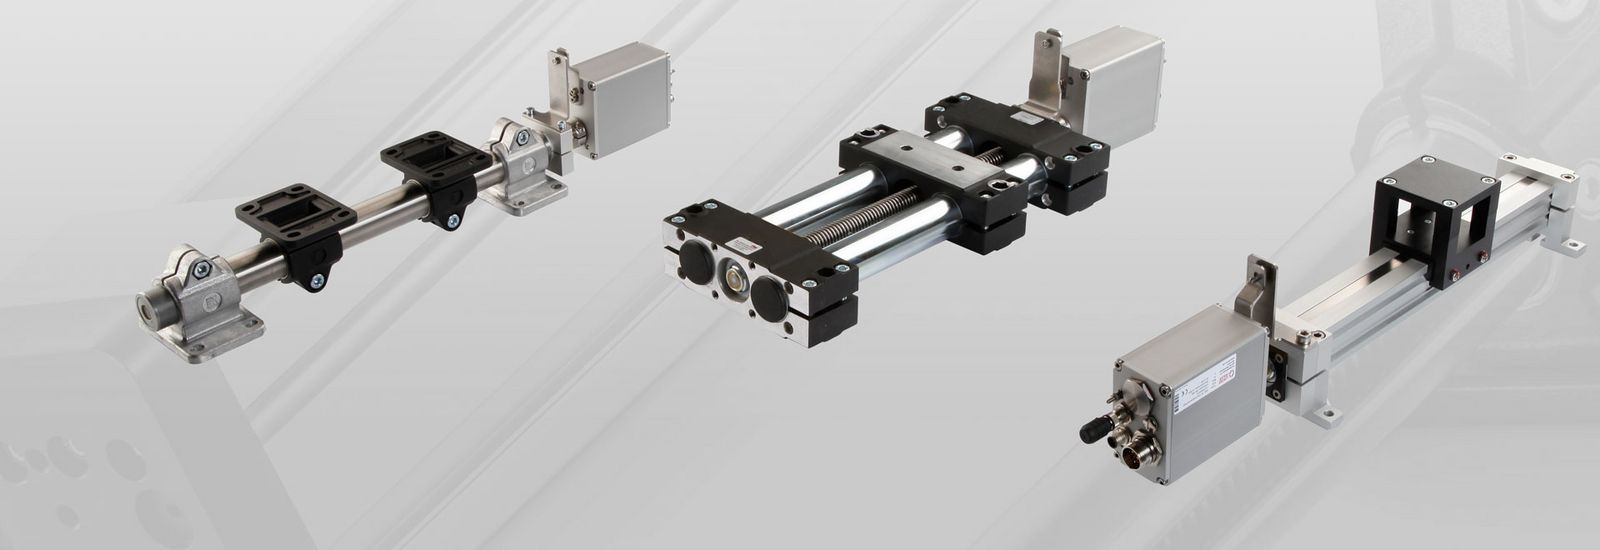 Automated format adjustment using RK linear actuators and actuators from Lenord+Bauer